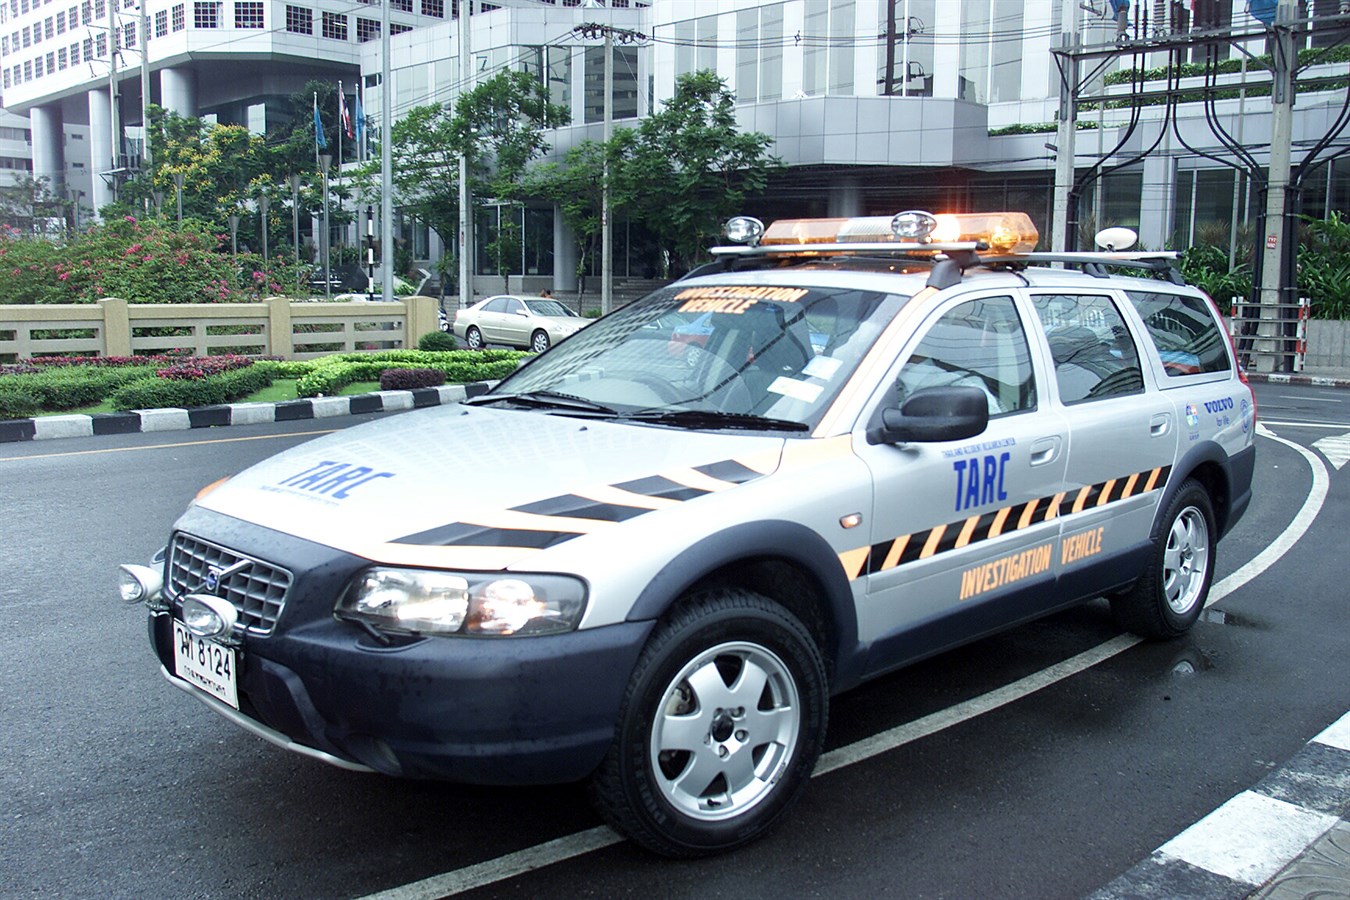 The TARC (Thailand Accident Research Centre) investigation vehicle